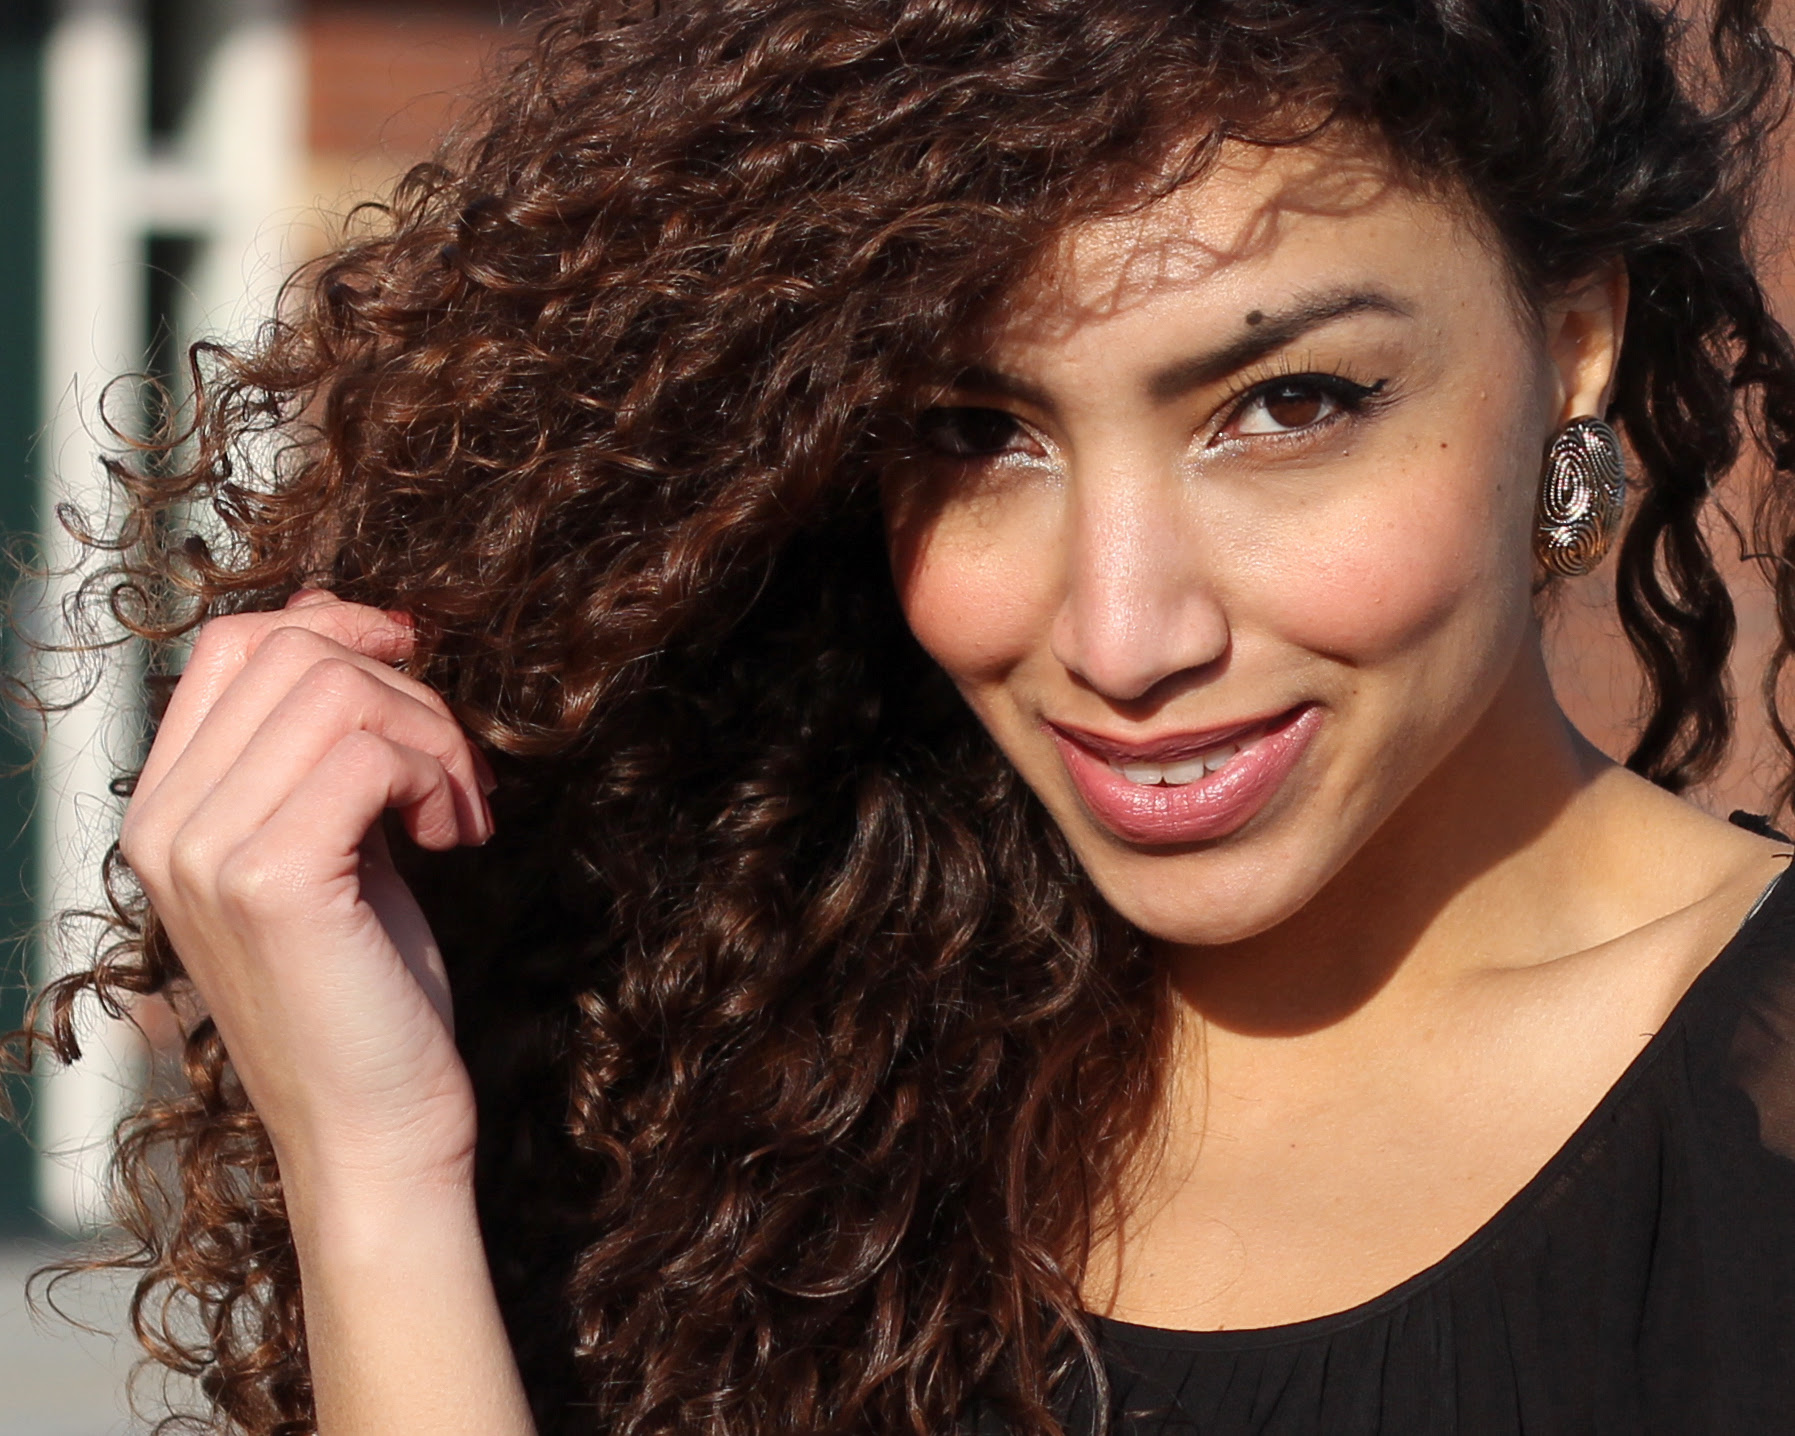 Curly Hair With Hats | Spefashion